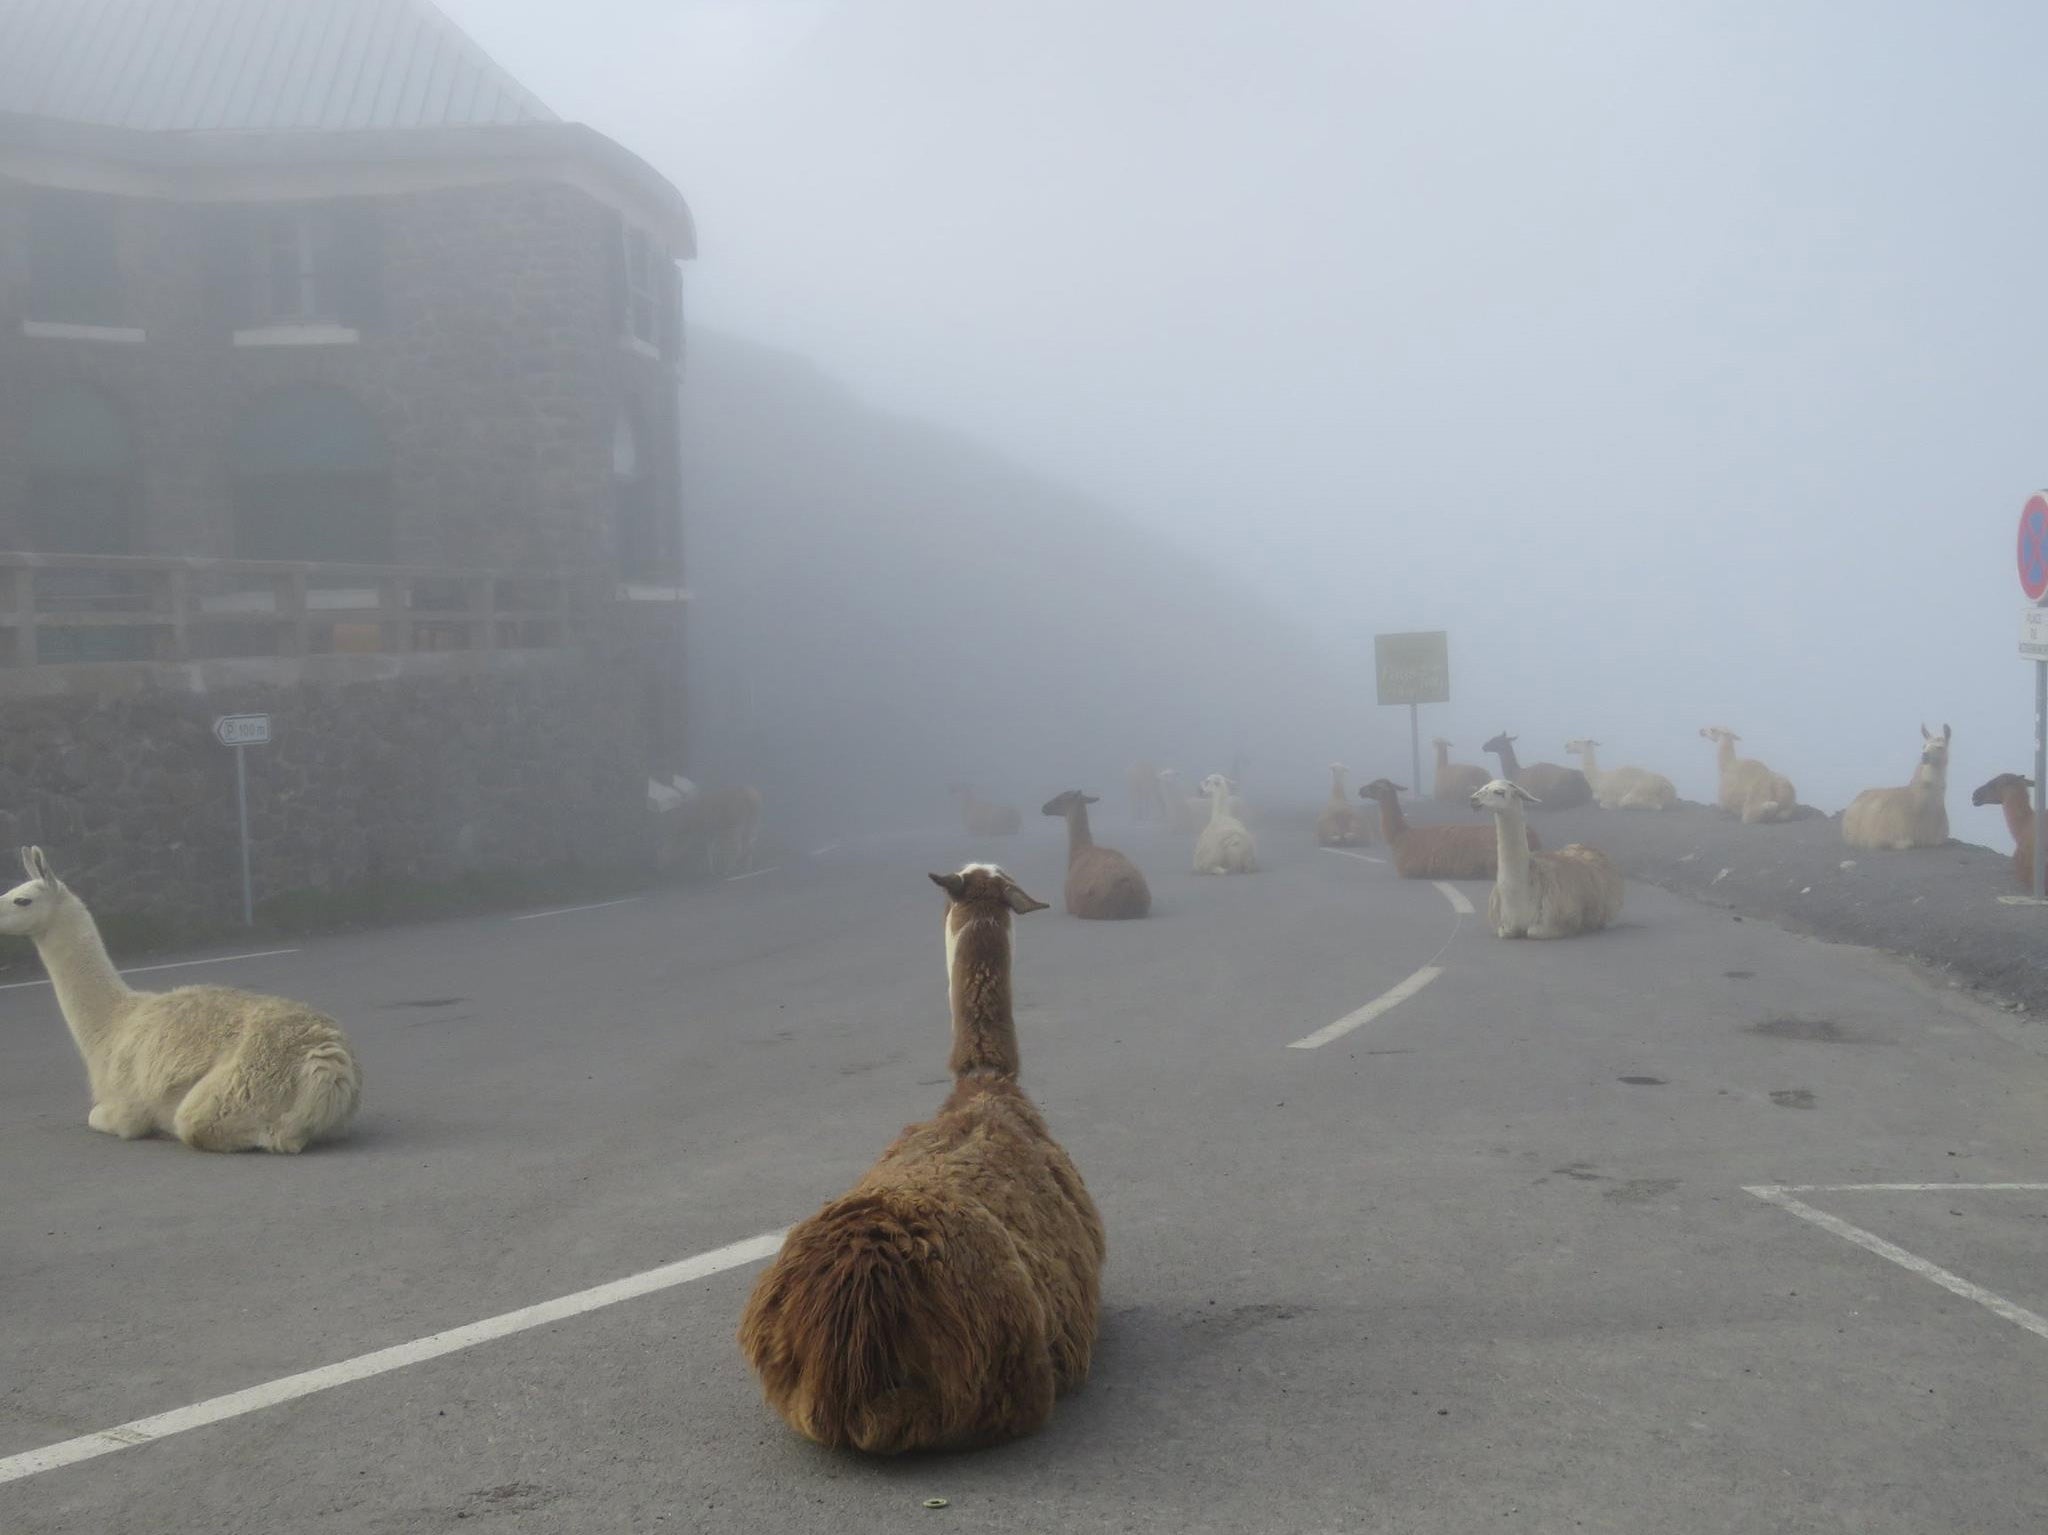 The herd of llamas sat on the road to keep warm in foggy conditions